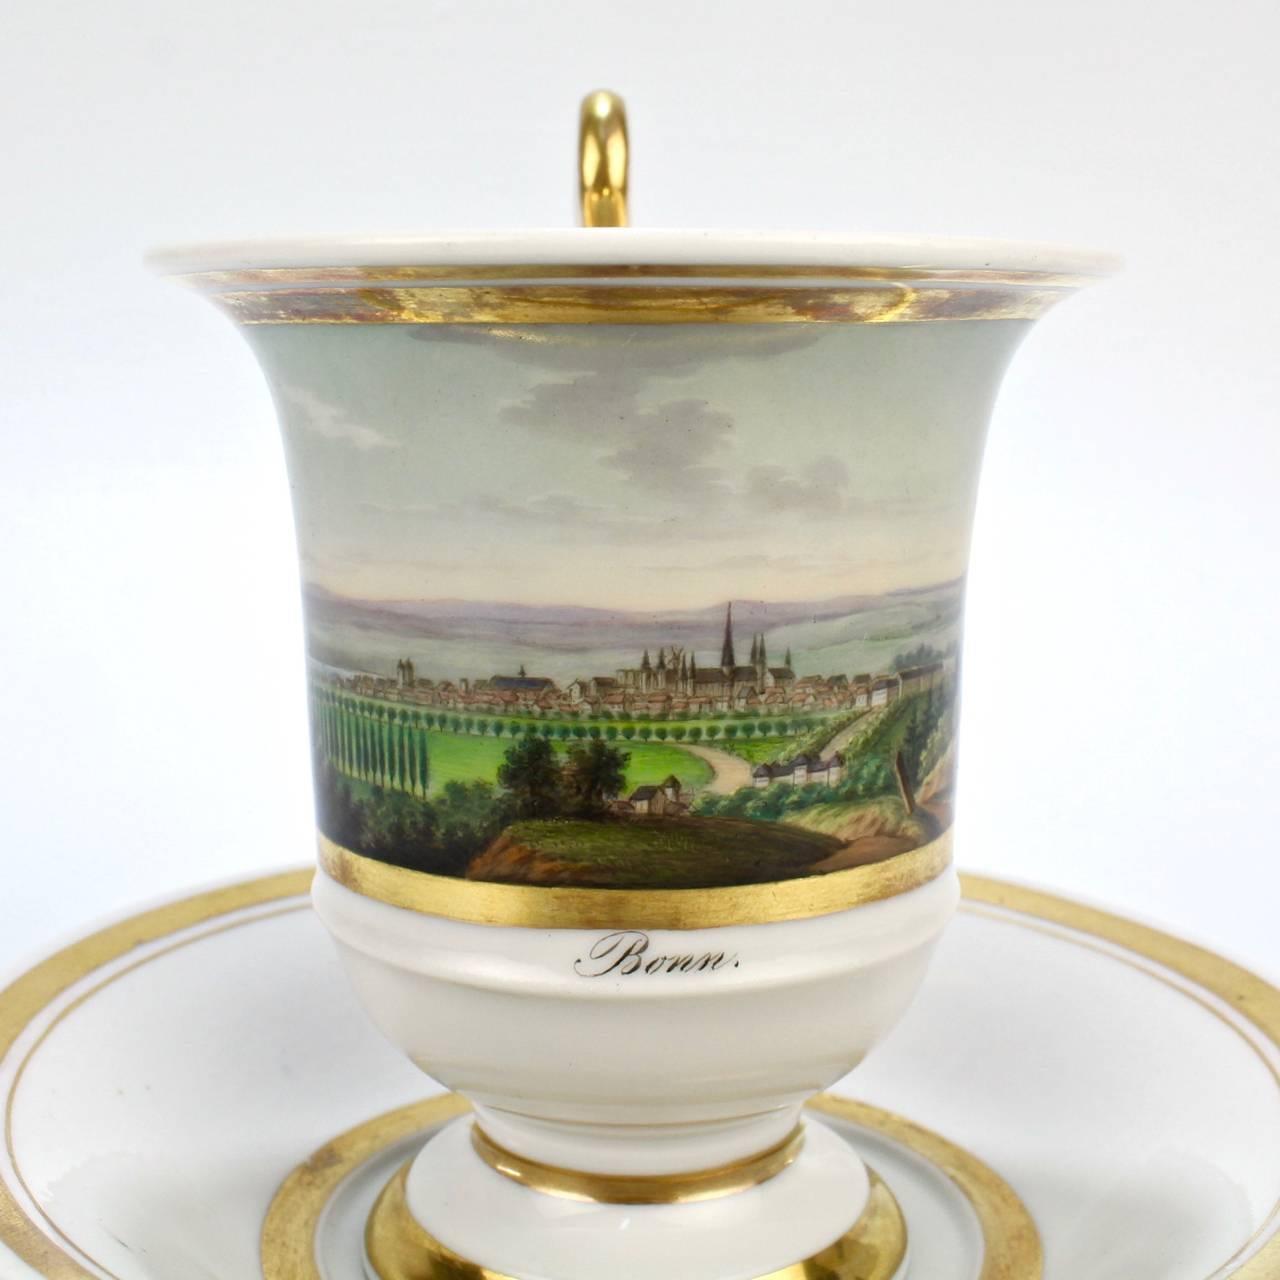 A fine antique German Biedermeier period topographical porcelain cup and saucer. 

The front decorated with a finely hand painted depiction of the city of Bonn. The reverse bears a dedication reading: 